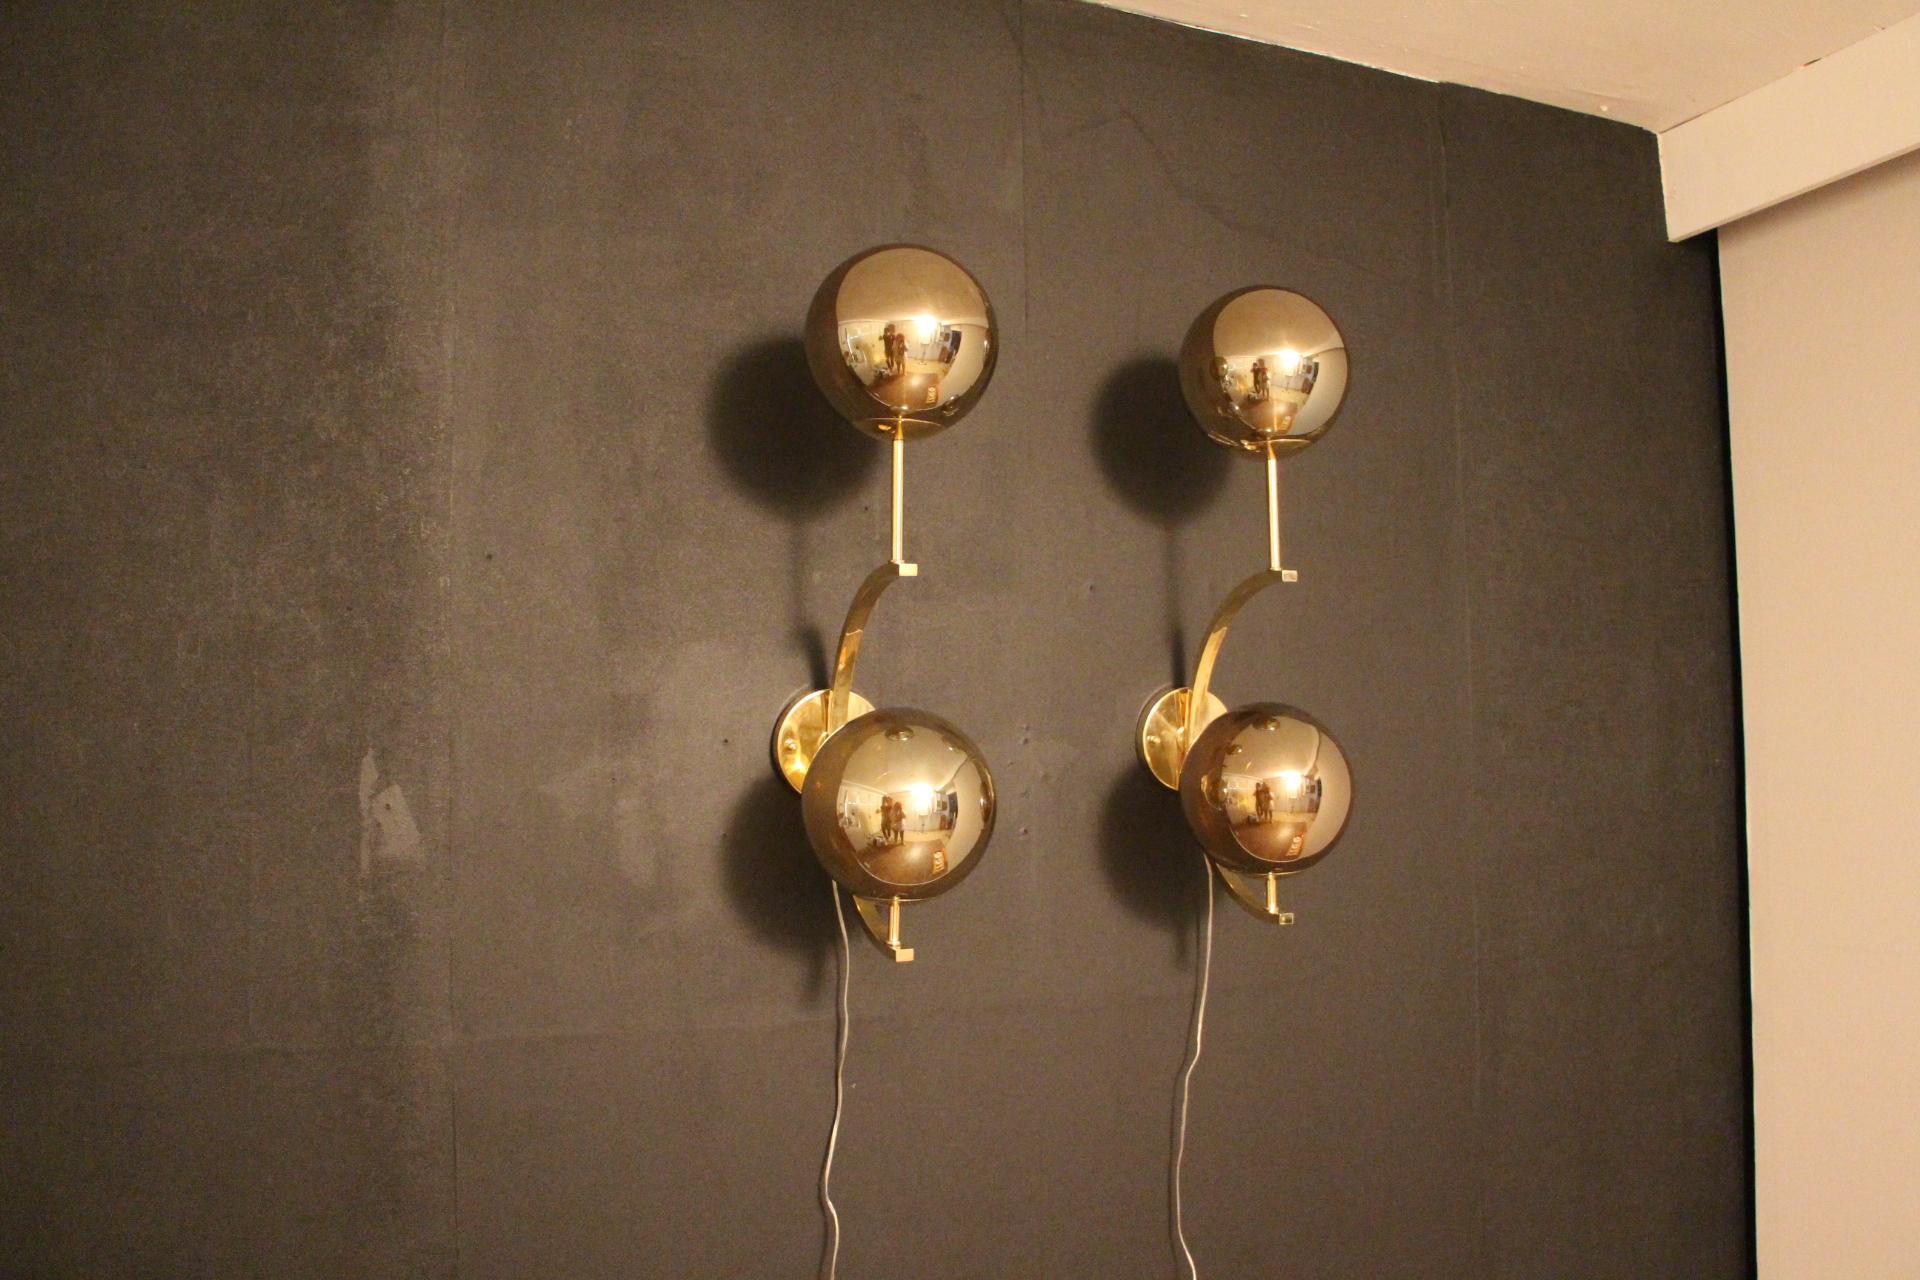 Italian Modern Midcentury Pair of Brass and Gold Mercurised Glass Sconces Wall Lights For Sale